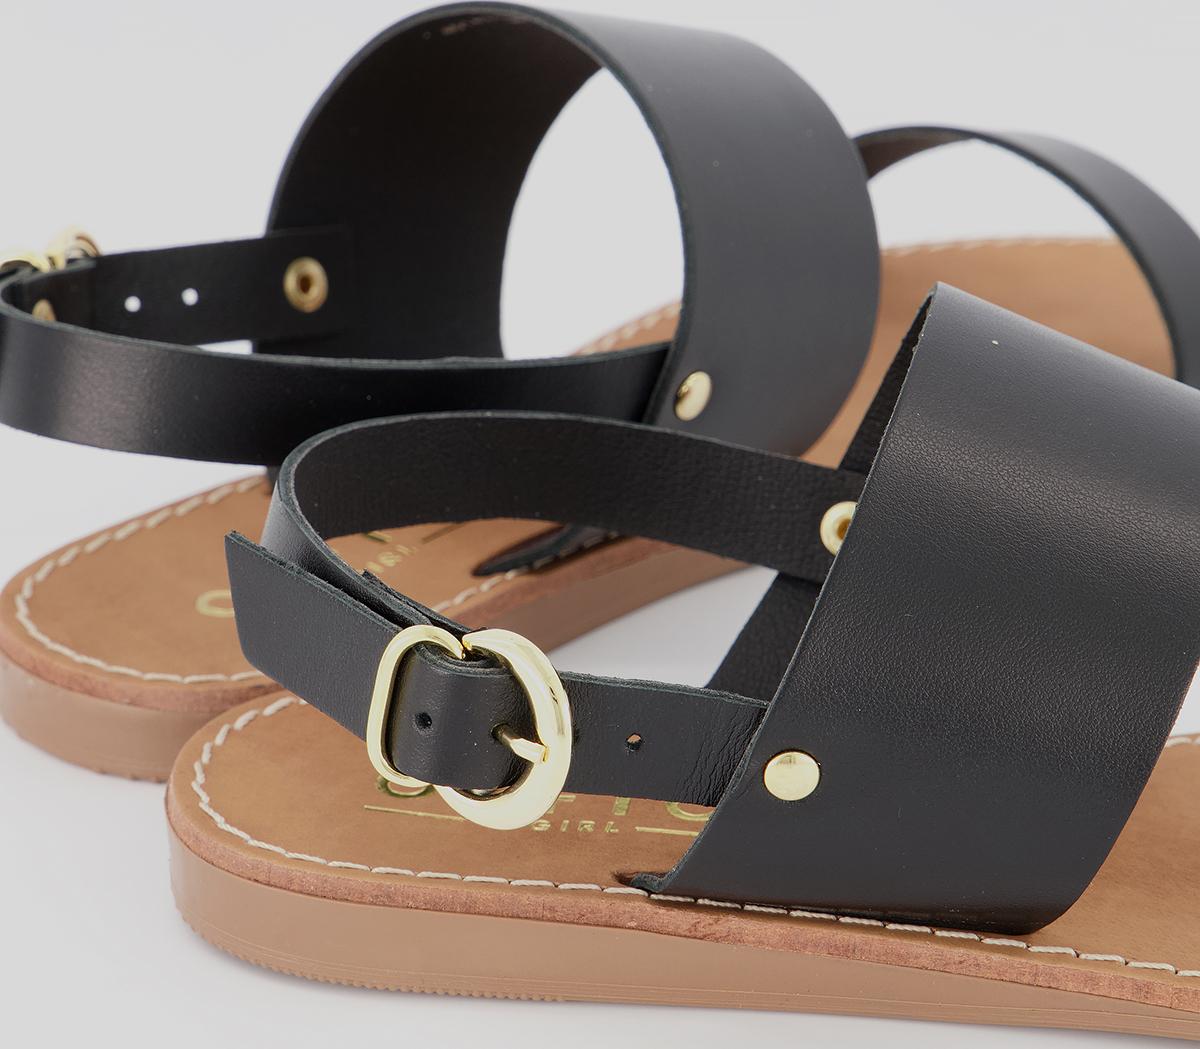 OFFICE Sweets Flat Sandals Black Leather - Women’s Sandals